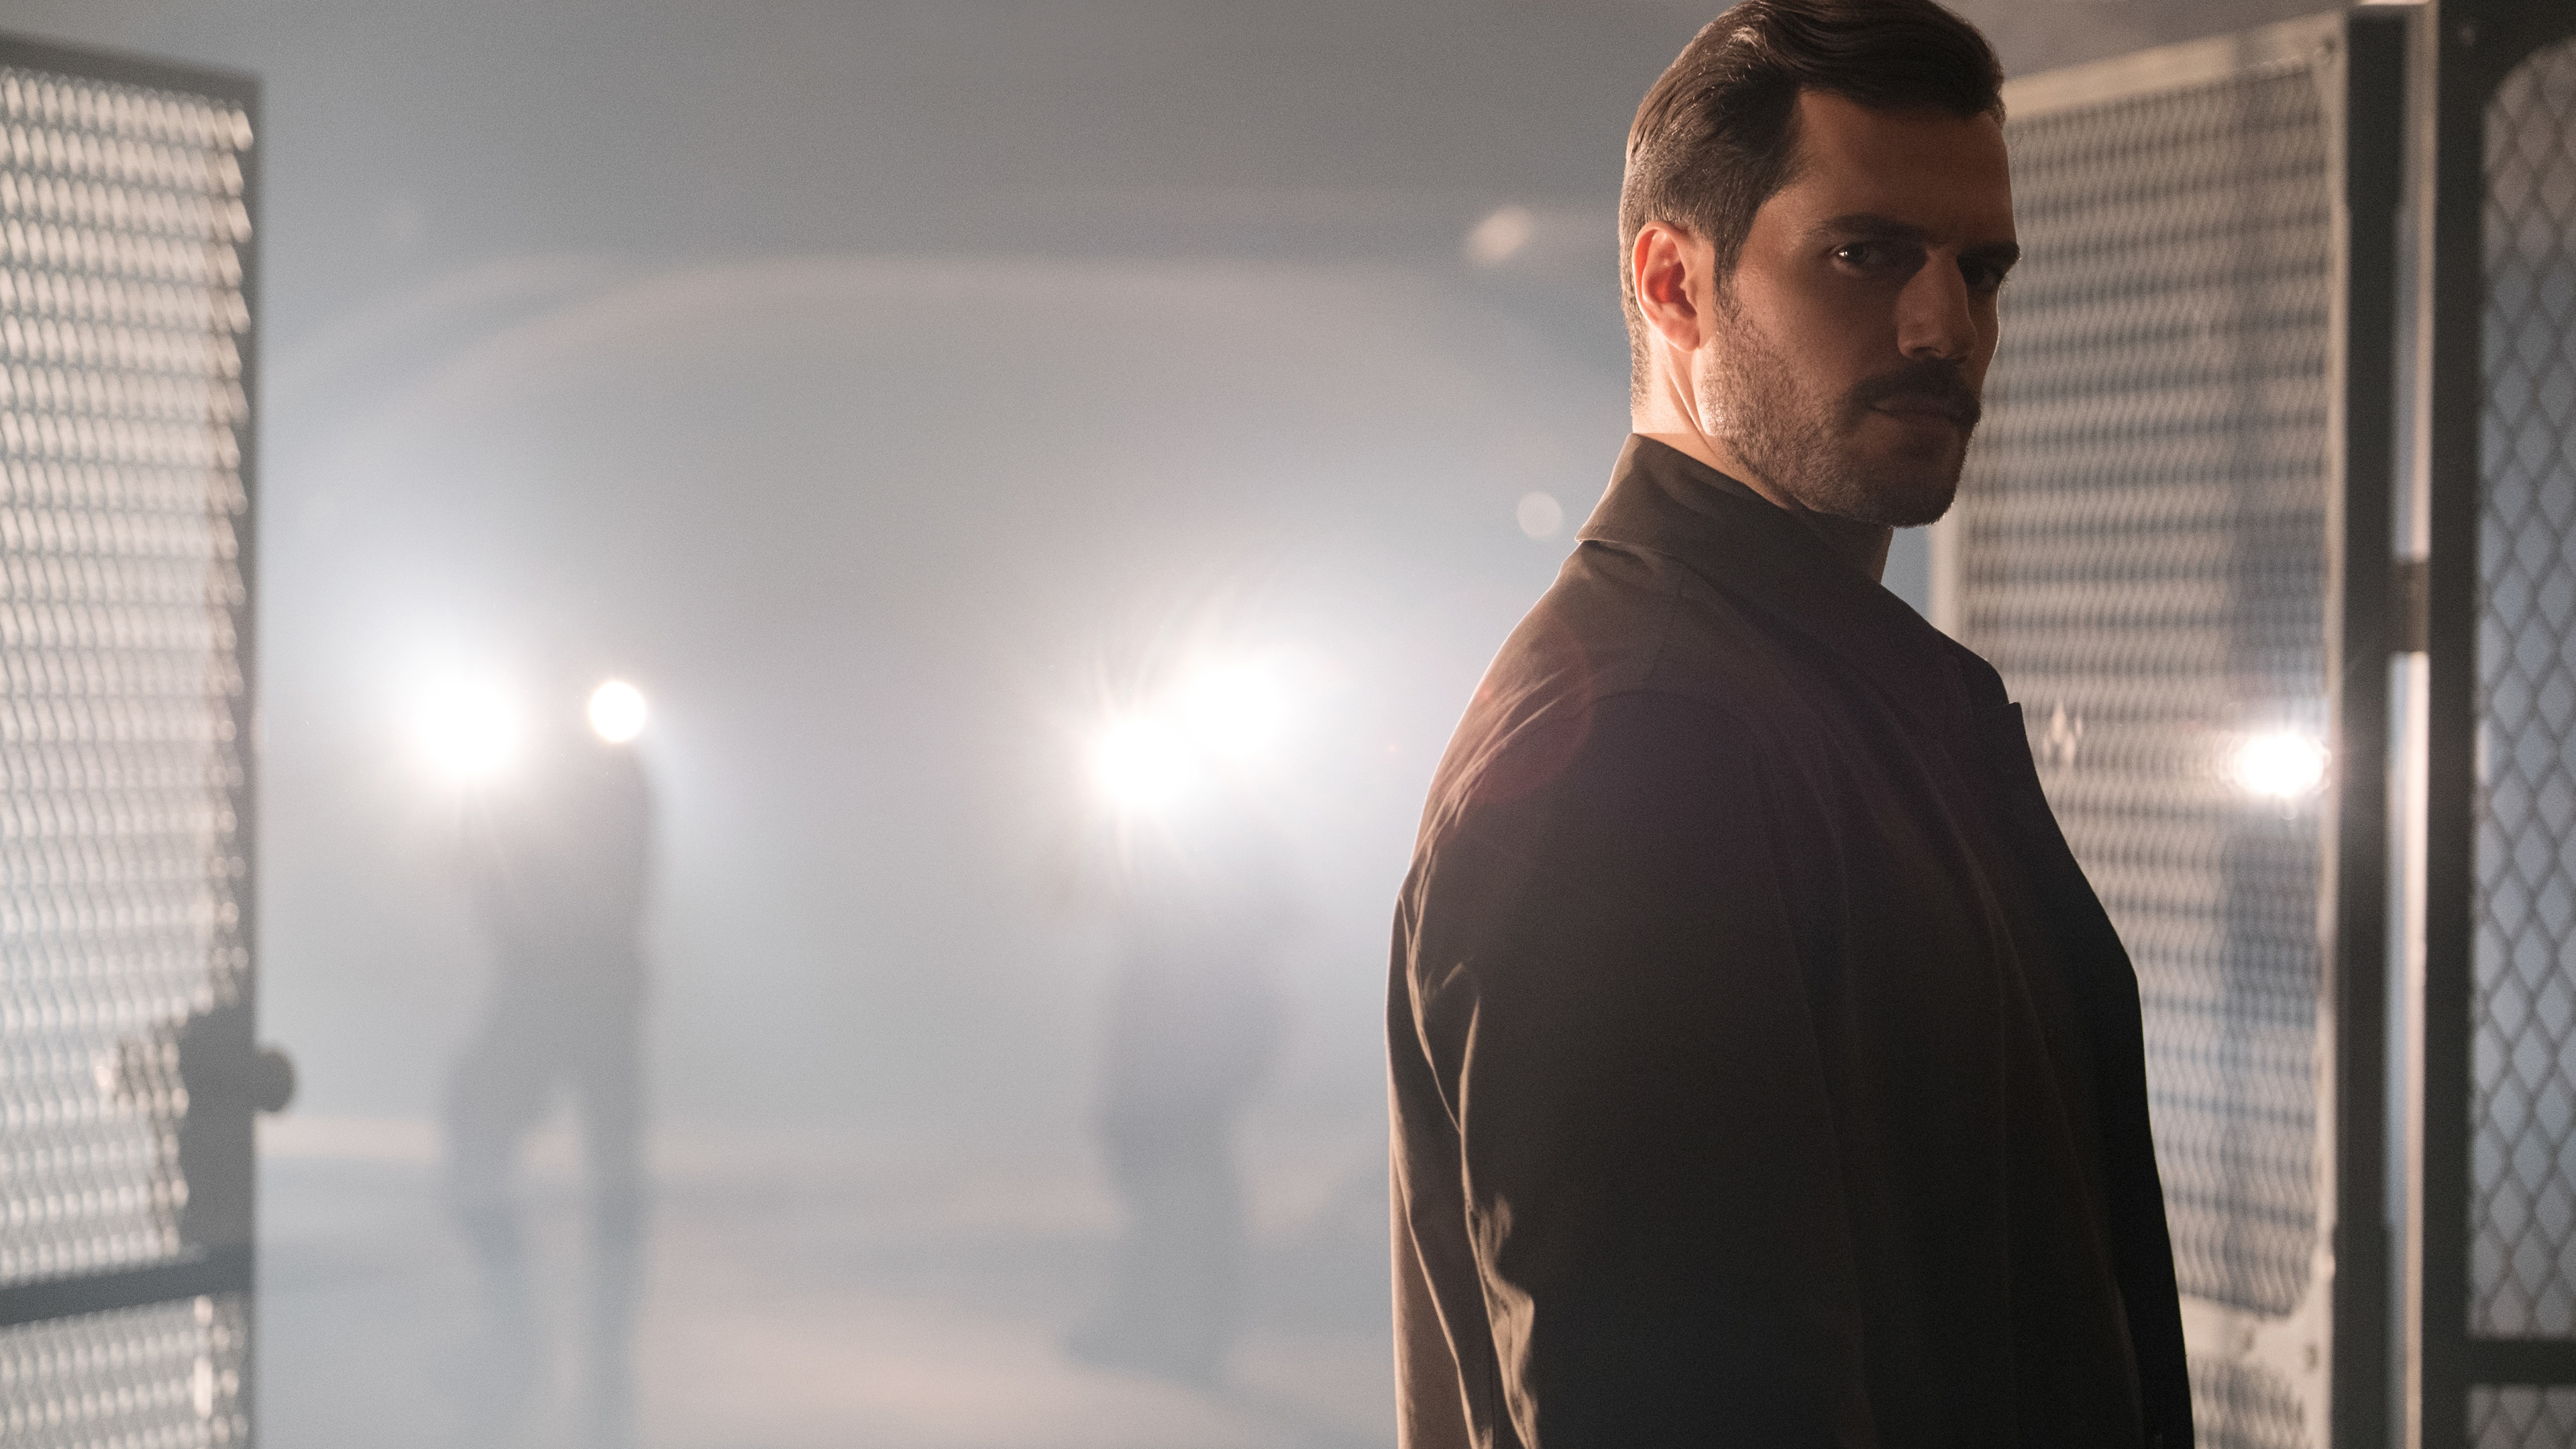 henry cavill as august walker in mission impossible fallout 2018 1537644915 - Henry Cavill As August Walker In Mission Impossible Fallout 2018 - movies wallpapers, mission impossible fallout wallpapers, mission impossible 6 wallpapers, henry cavill wallpapers, hd-wallpapers, 4k-wallpapers, 2018-movies-wallpapers